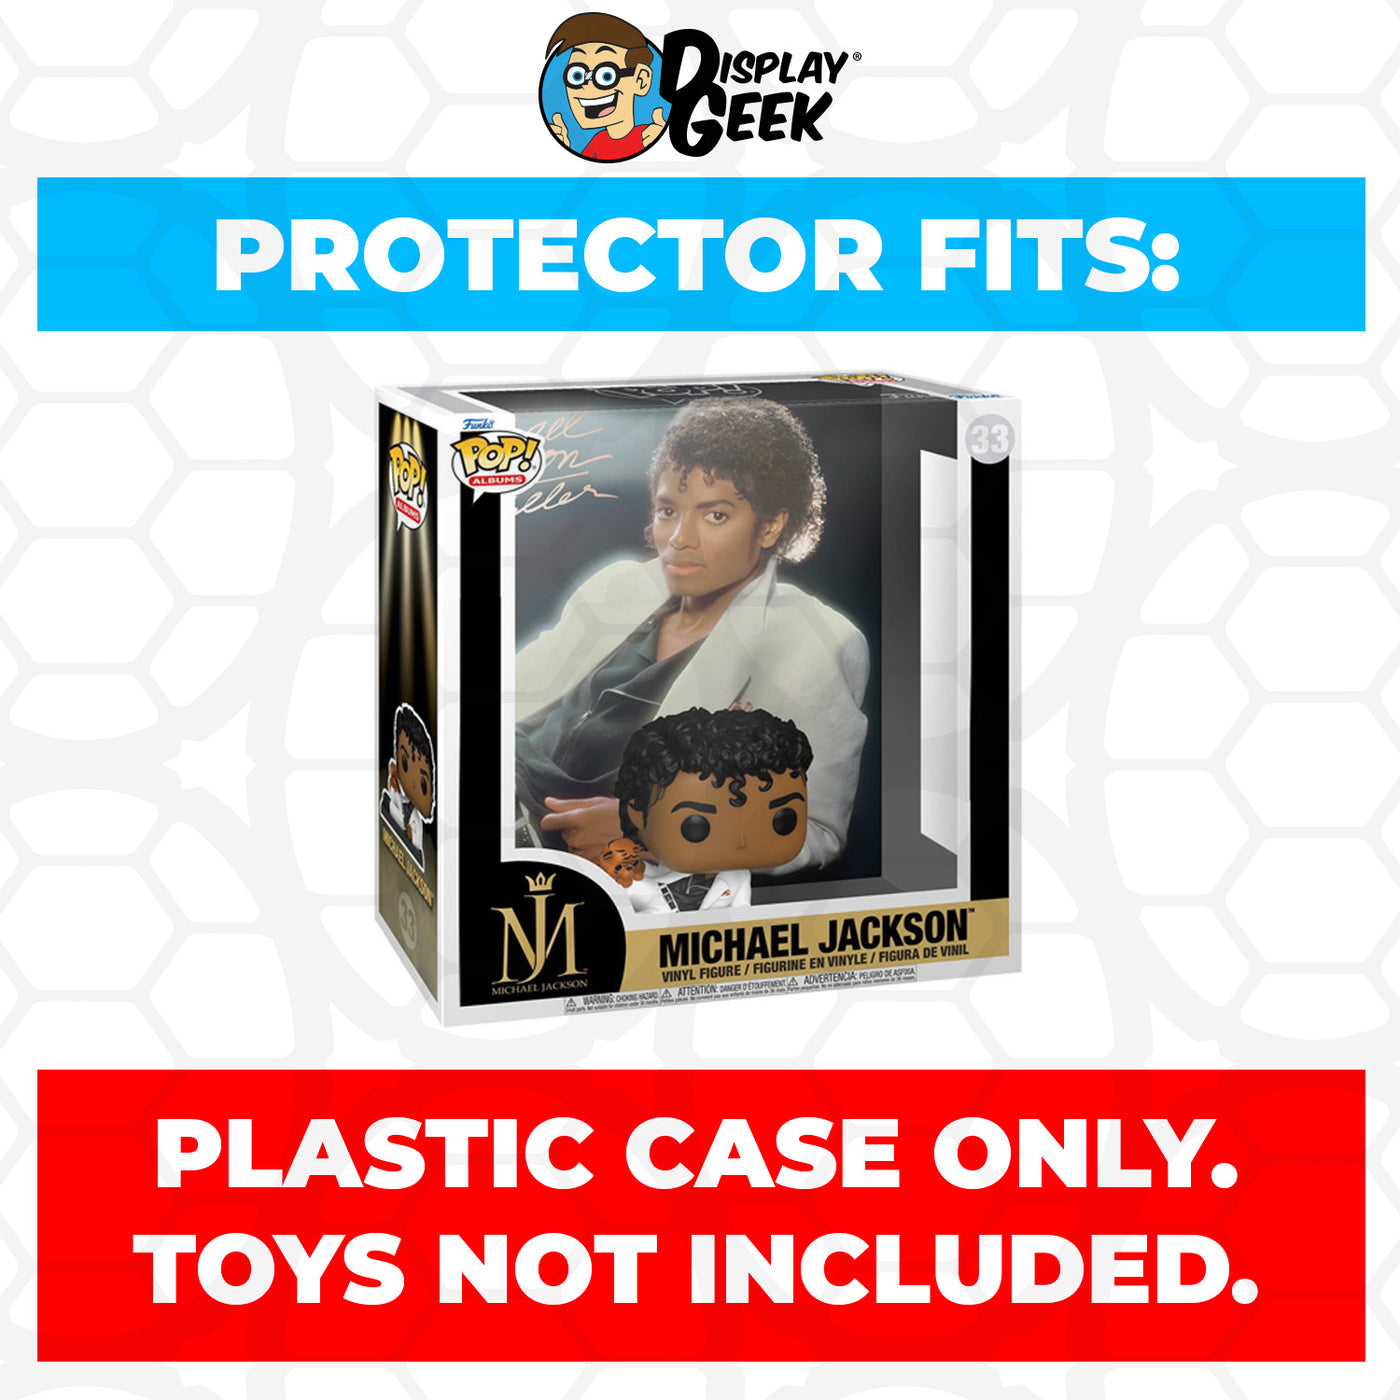 Pop Protector for Michael Jackson Thriller #33 Funko Pop Albums on The Protector Guide App by Display Geek